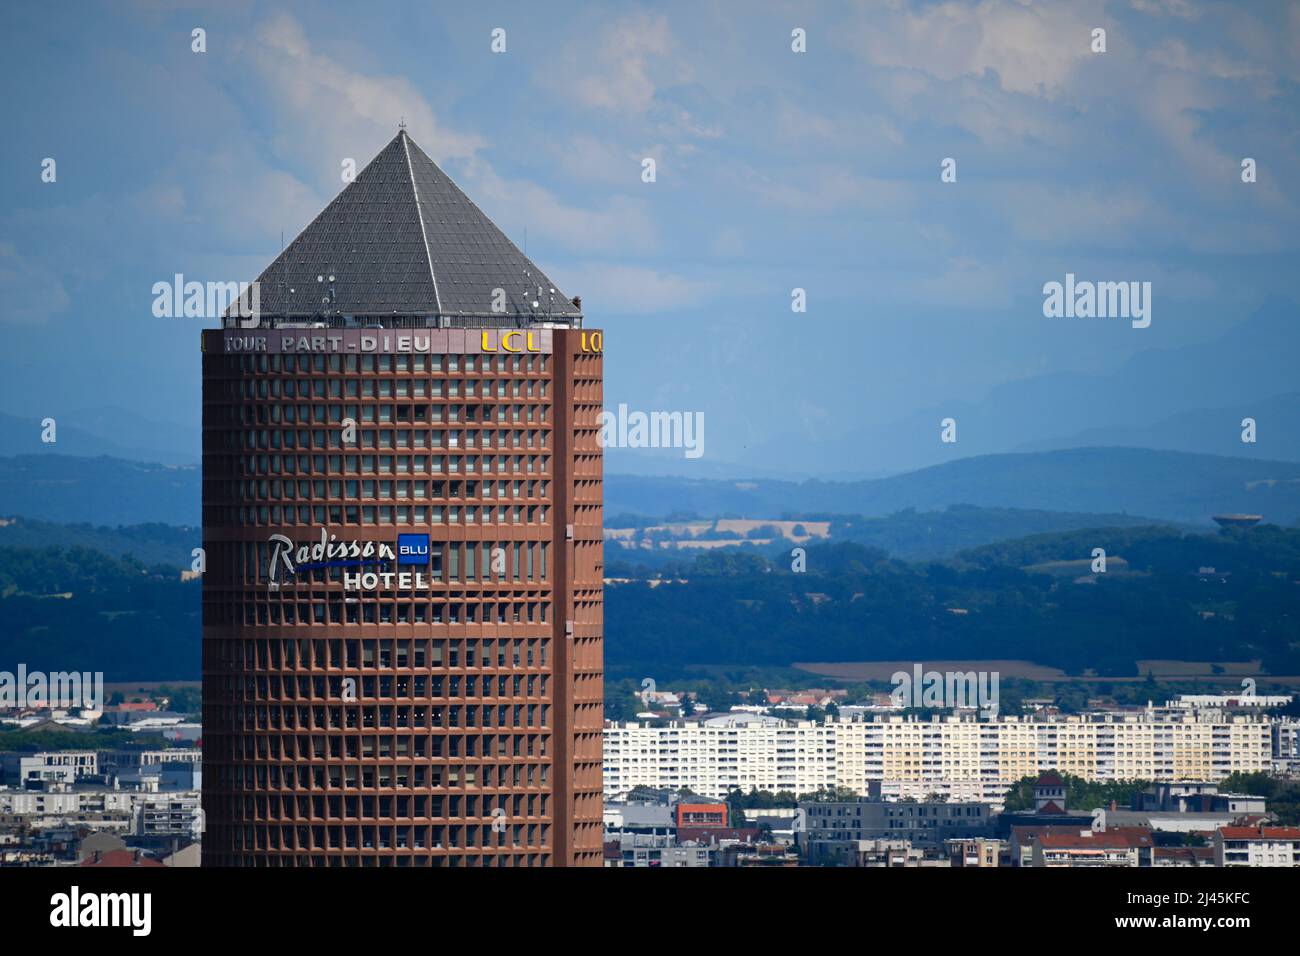 Lyon (central-eastern France): La Part-Dieu District. Top of the Part-Dieu LCL Tower, known as “Le Crayon” (The Pencil) with the Radisson Blue Hotel Stock Photo